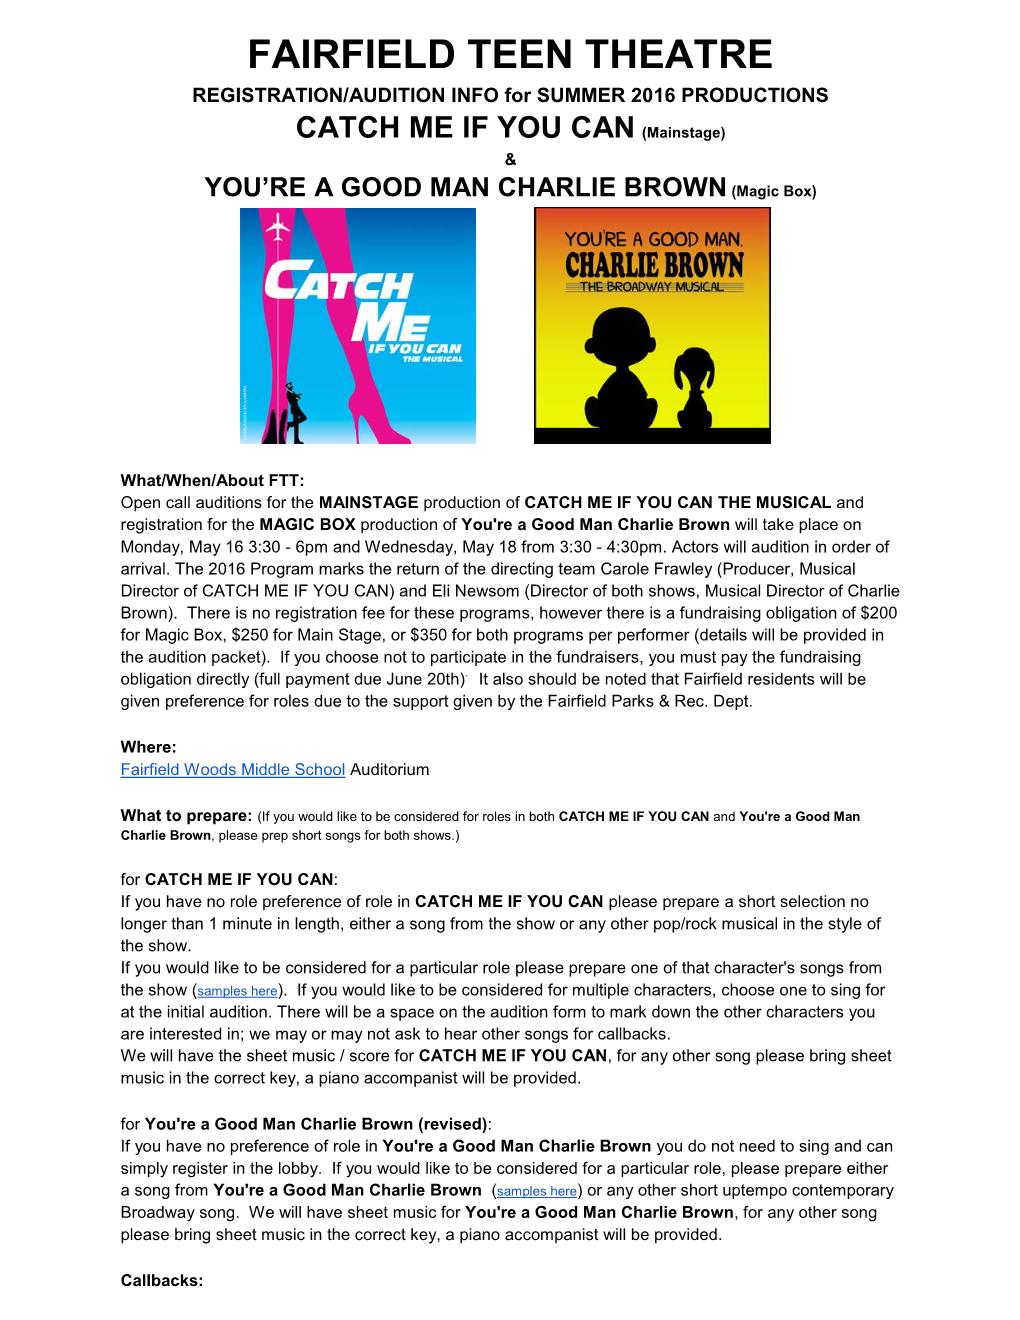 FAIRFIELD TEEN THEATRE REGISTRATION/AUDITION INFO for SUMMER 2016 PRODUCTIONS CATCH ME IF YOU CAN (Mainstage) & YOU’RE a GOOD MAN CHARLIE BROWN (Magic Box)